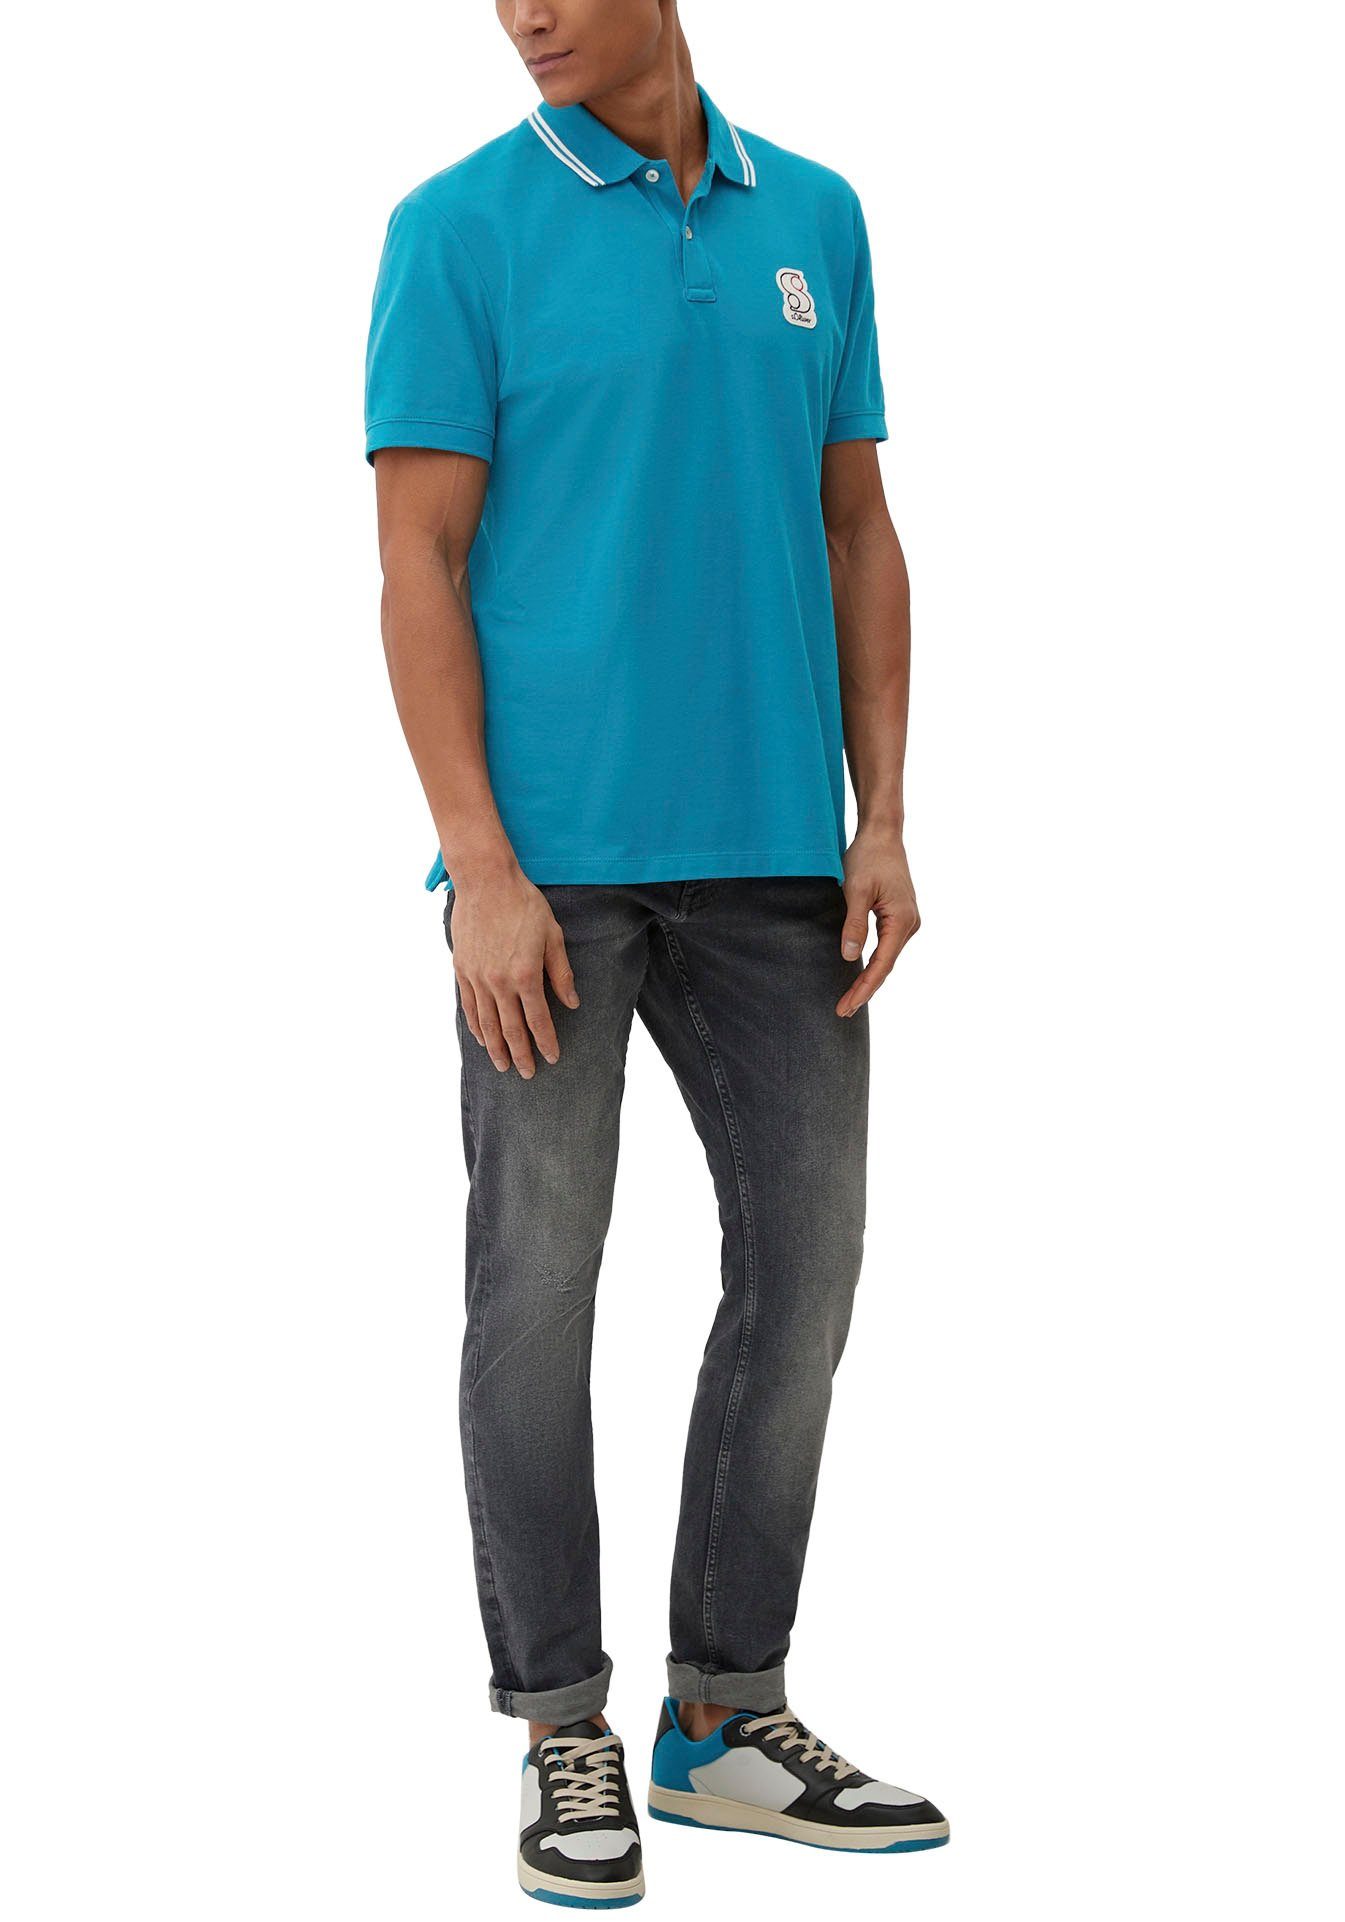 Poloshirt s.Oliver Labelpatch green mit blue